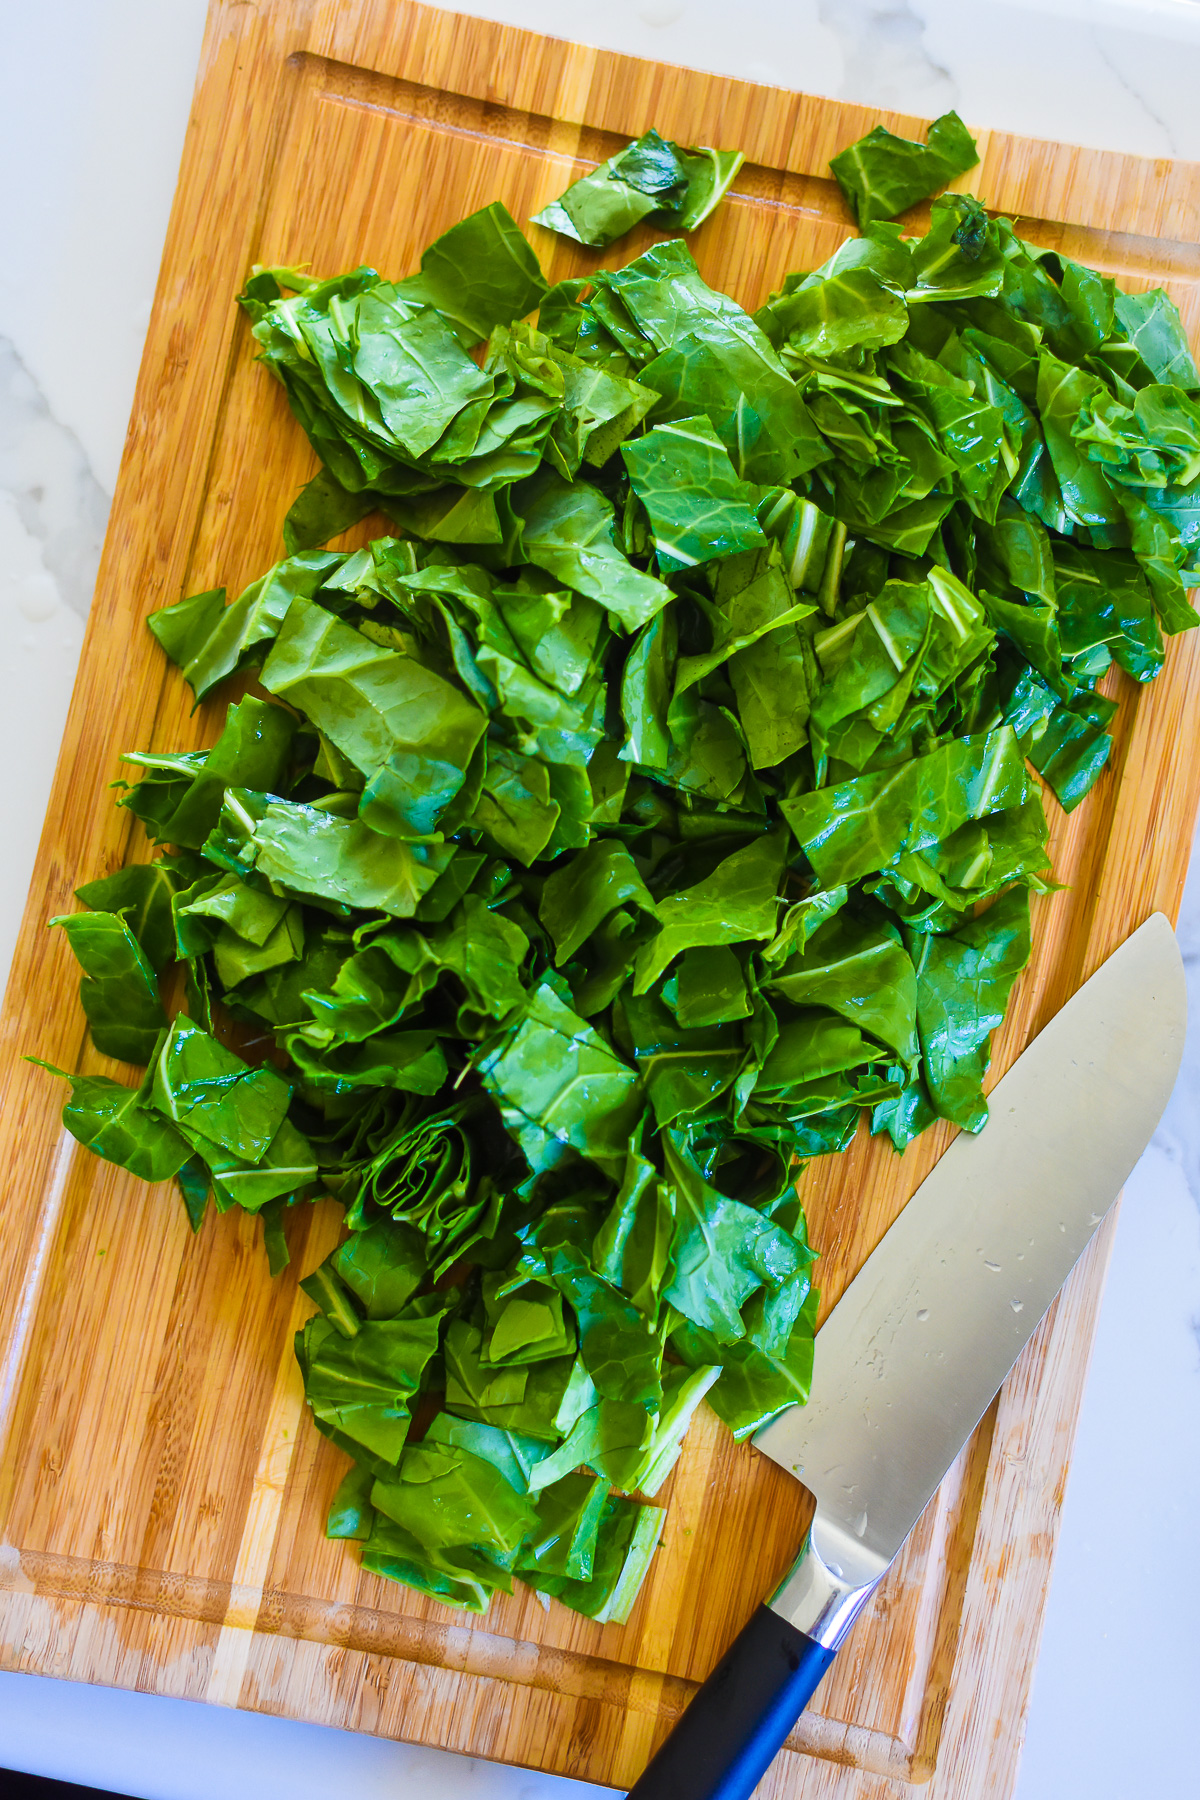 washed, stemmed, and chopped collard greens on a wooden cutting board next to a sharp knife.